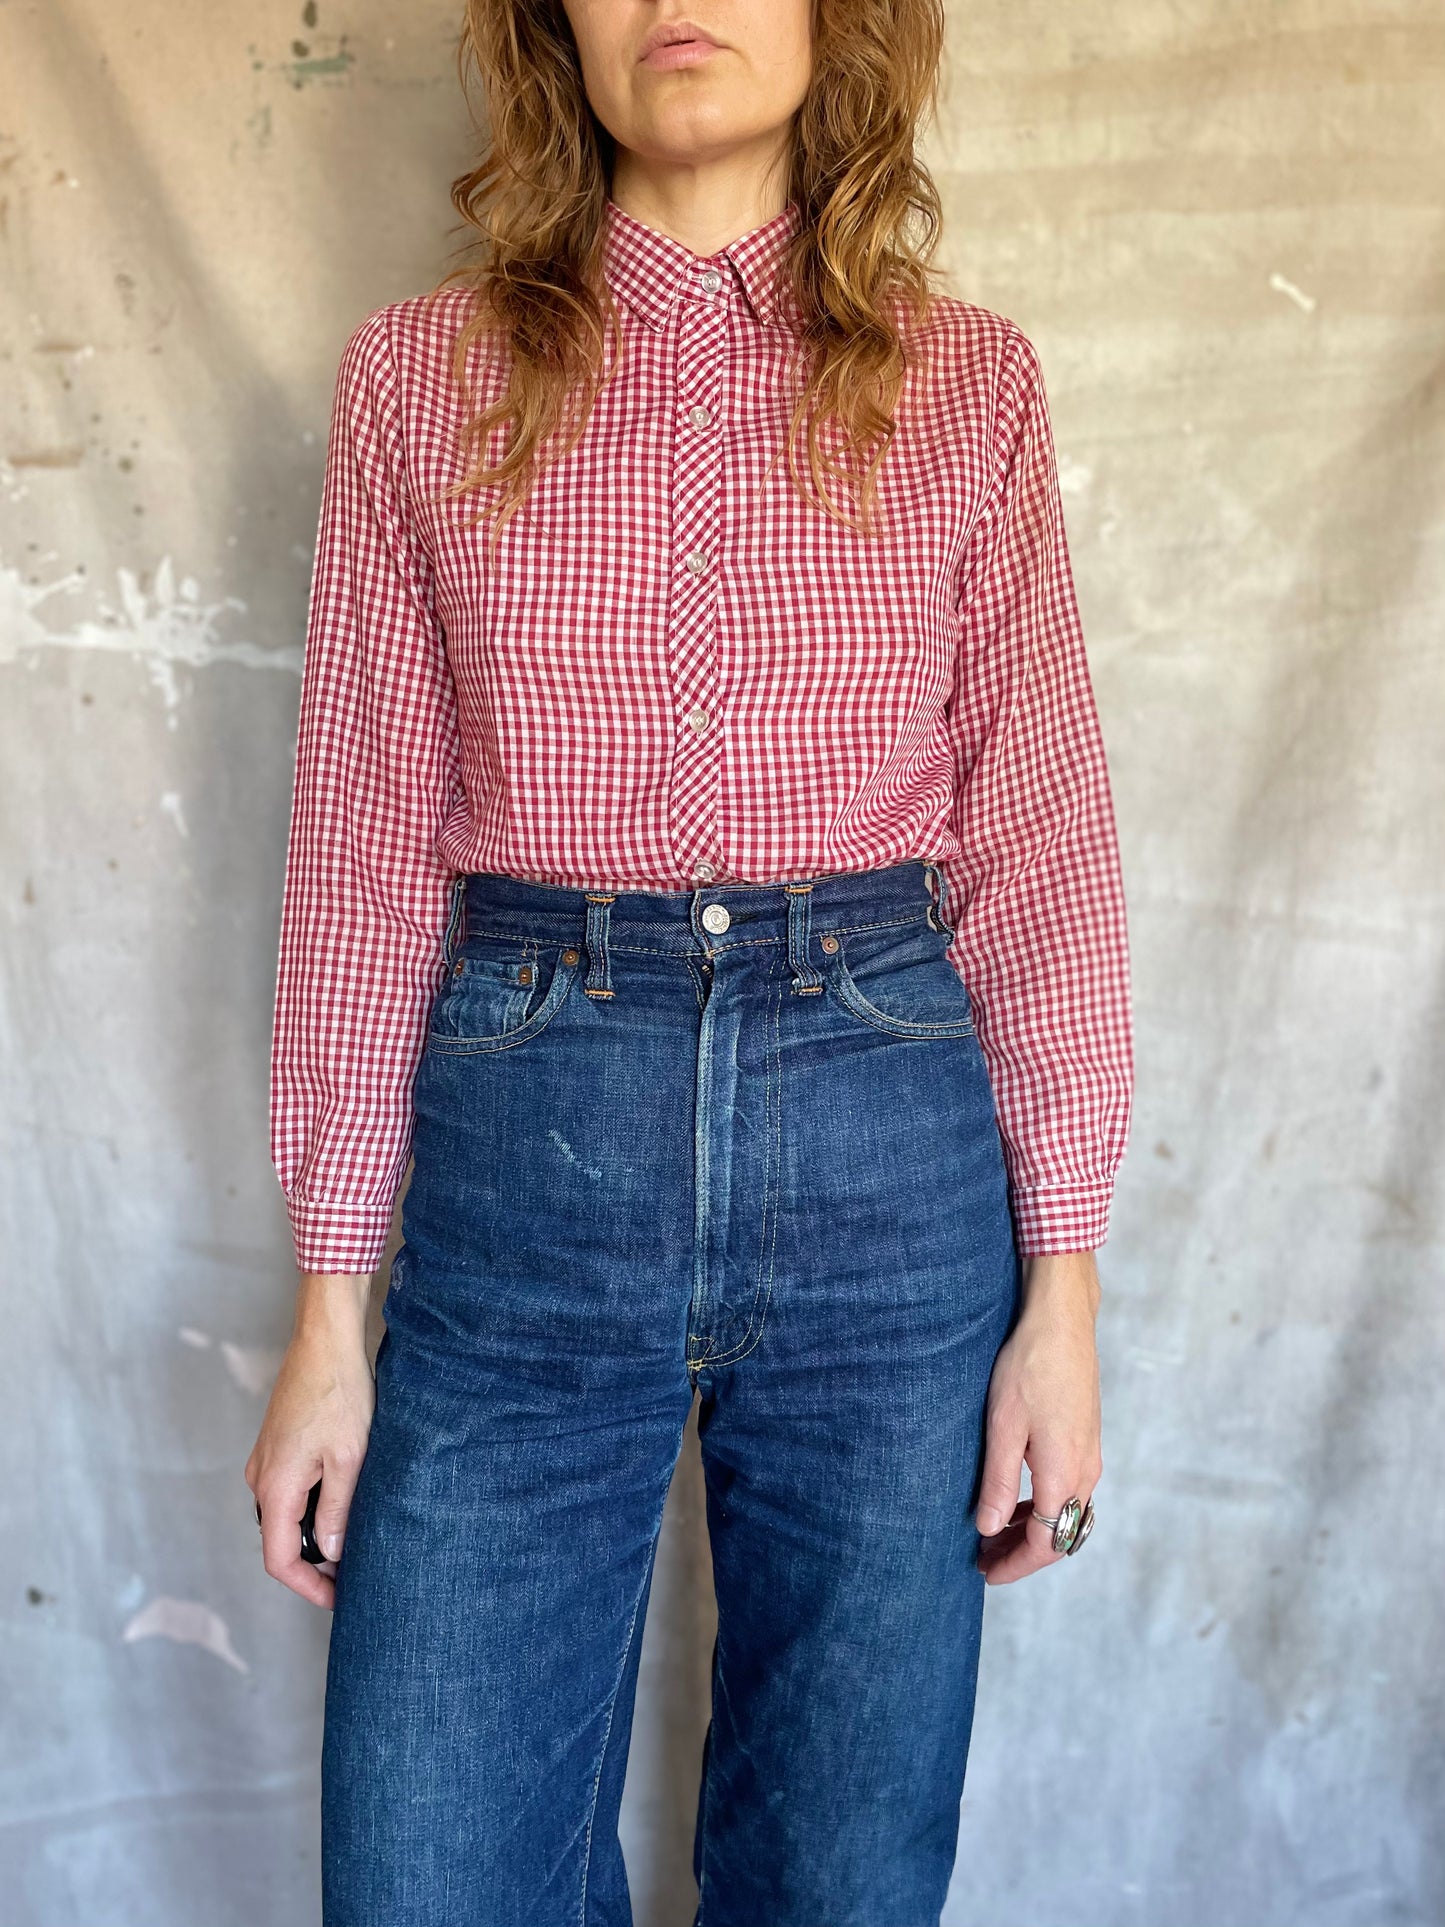 80s Sears Gingham Blouse